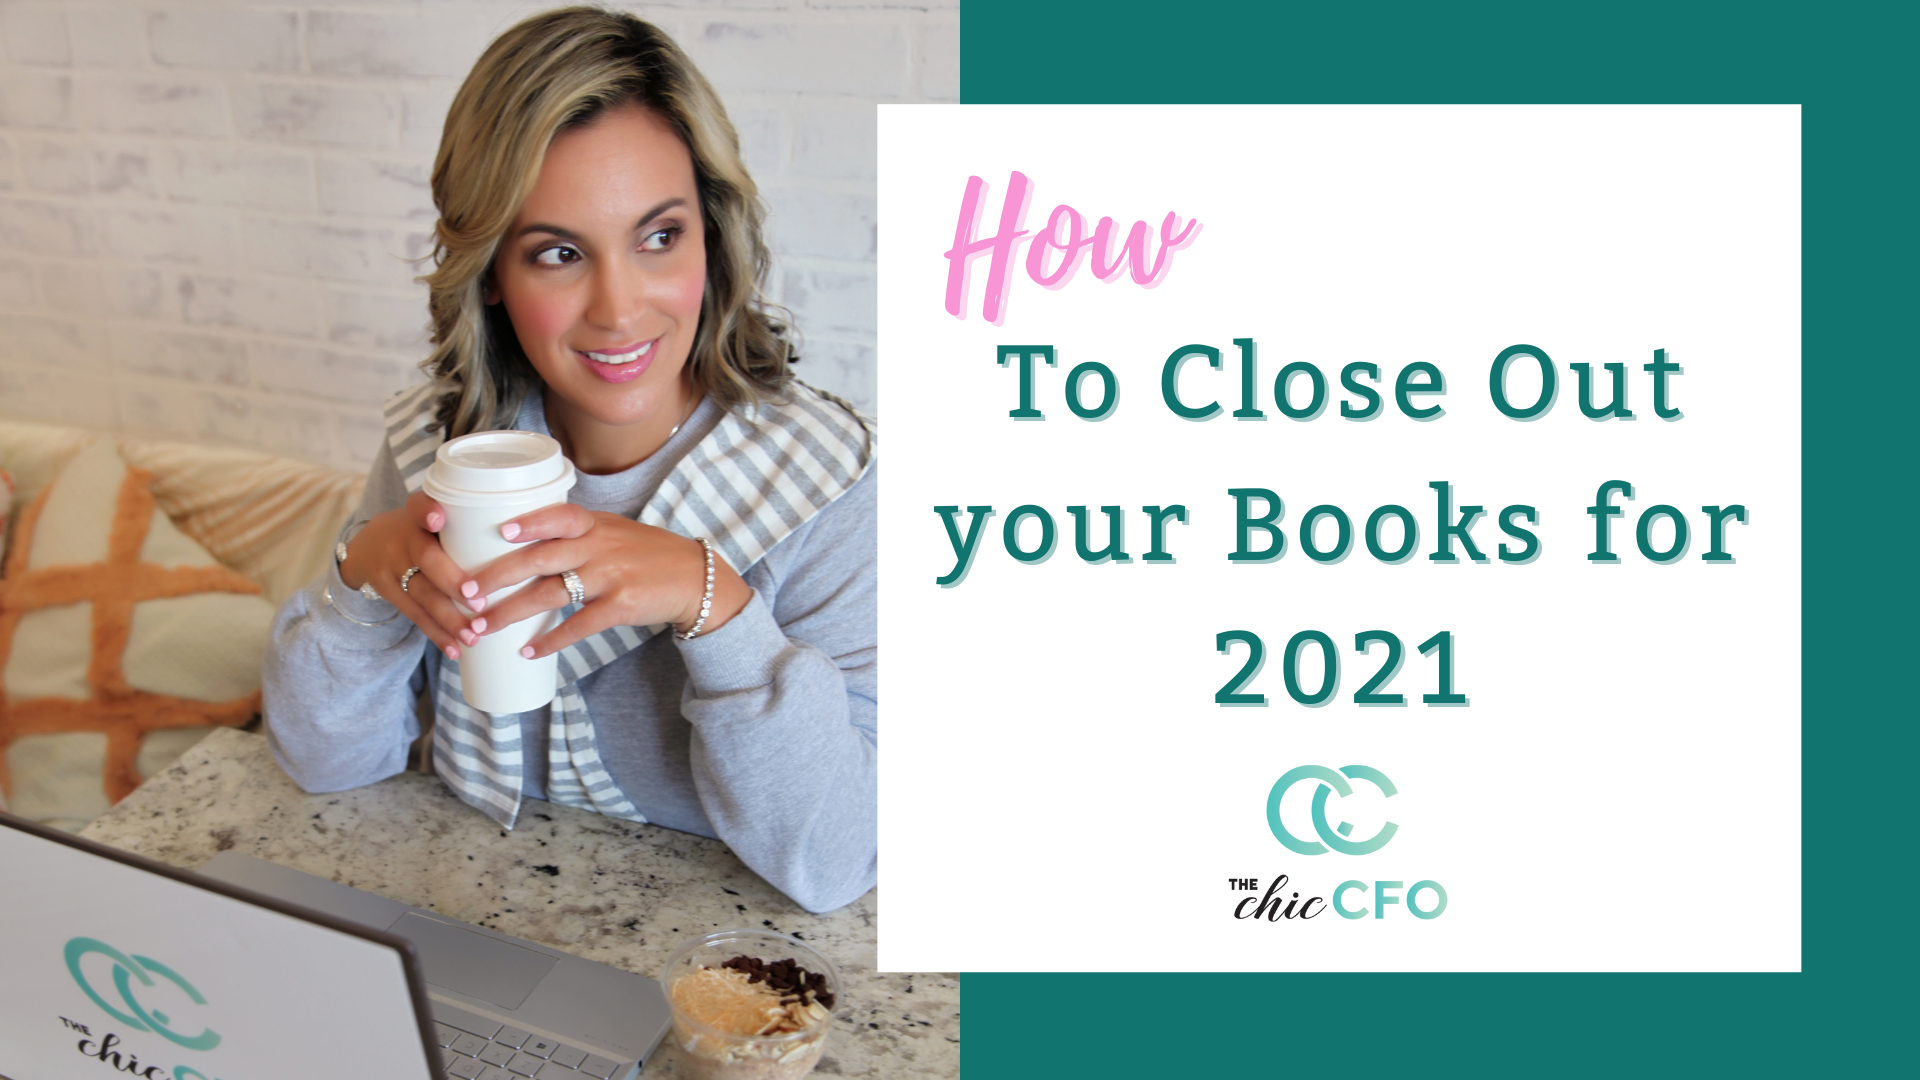 How to close out your books for 2021 FB Event Cover - Template